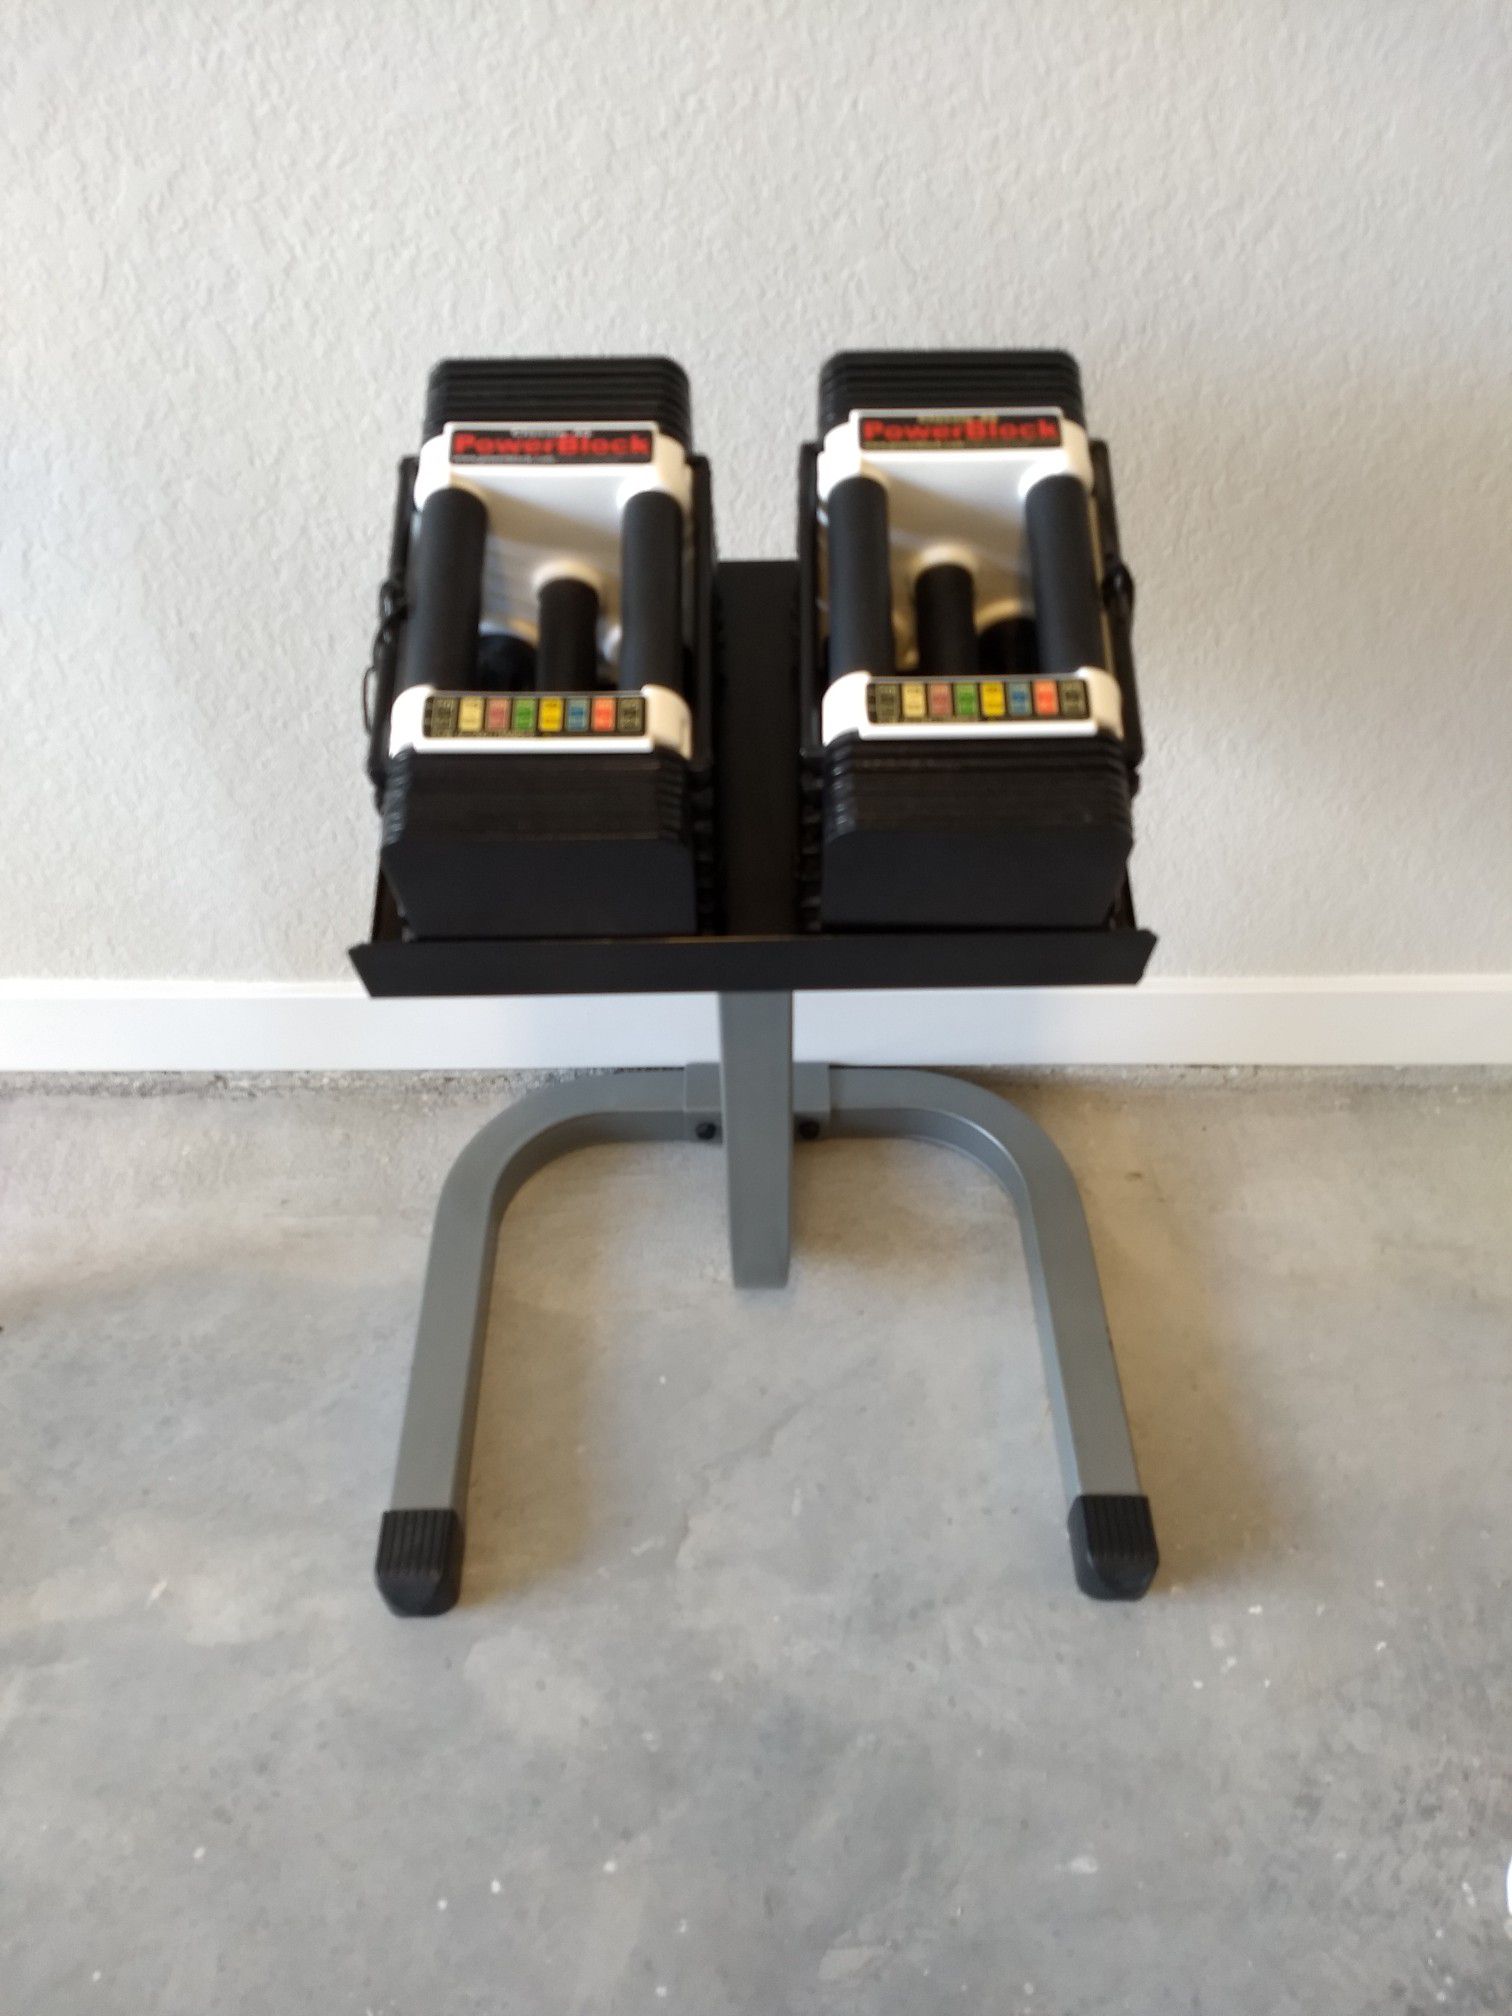 Power Block dumbbells with stand